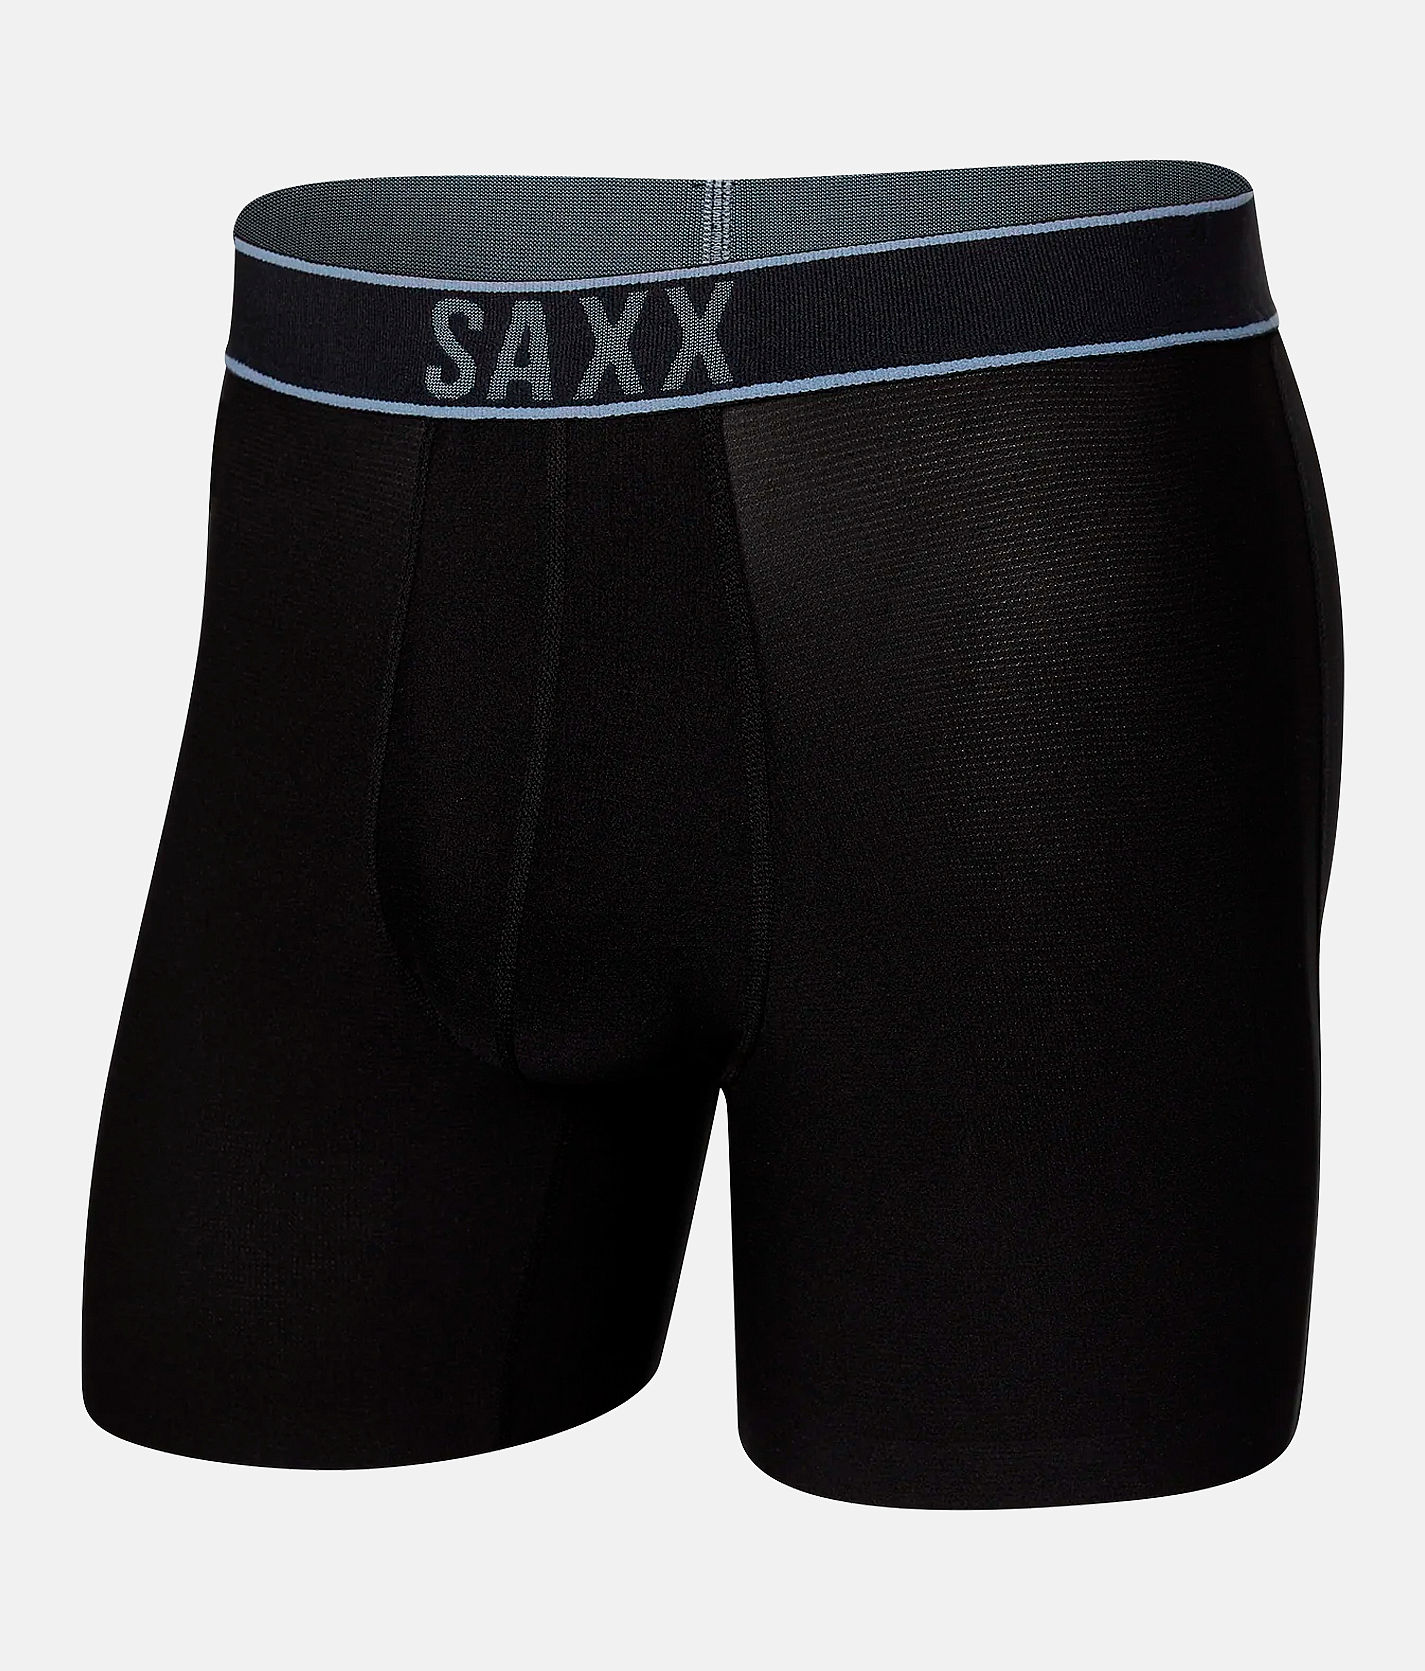 SAXX Men's Underwear - Droptemp Cooling Cotton with Built-in Pouch Support  - Underwear for Men, Fall